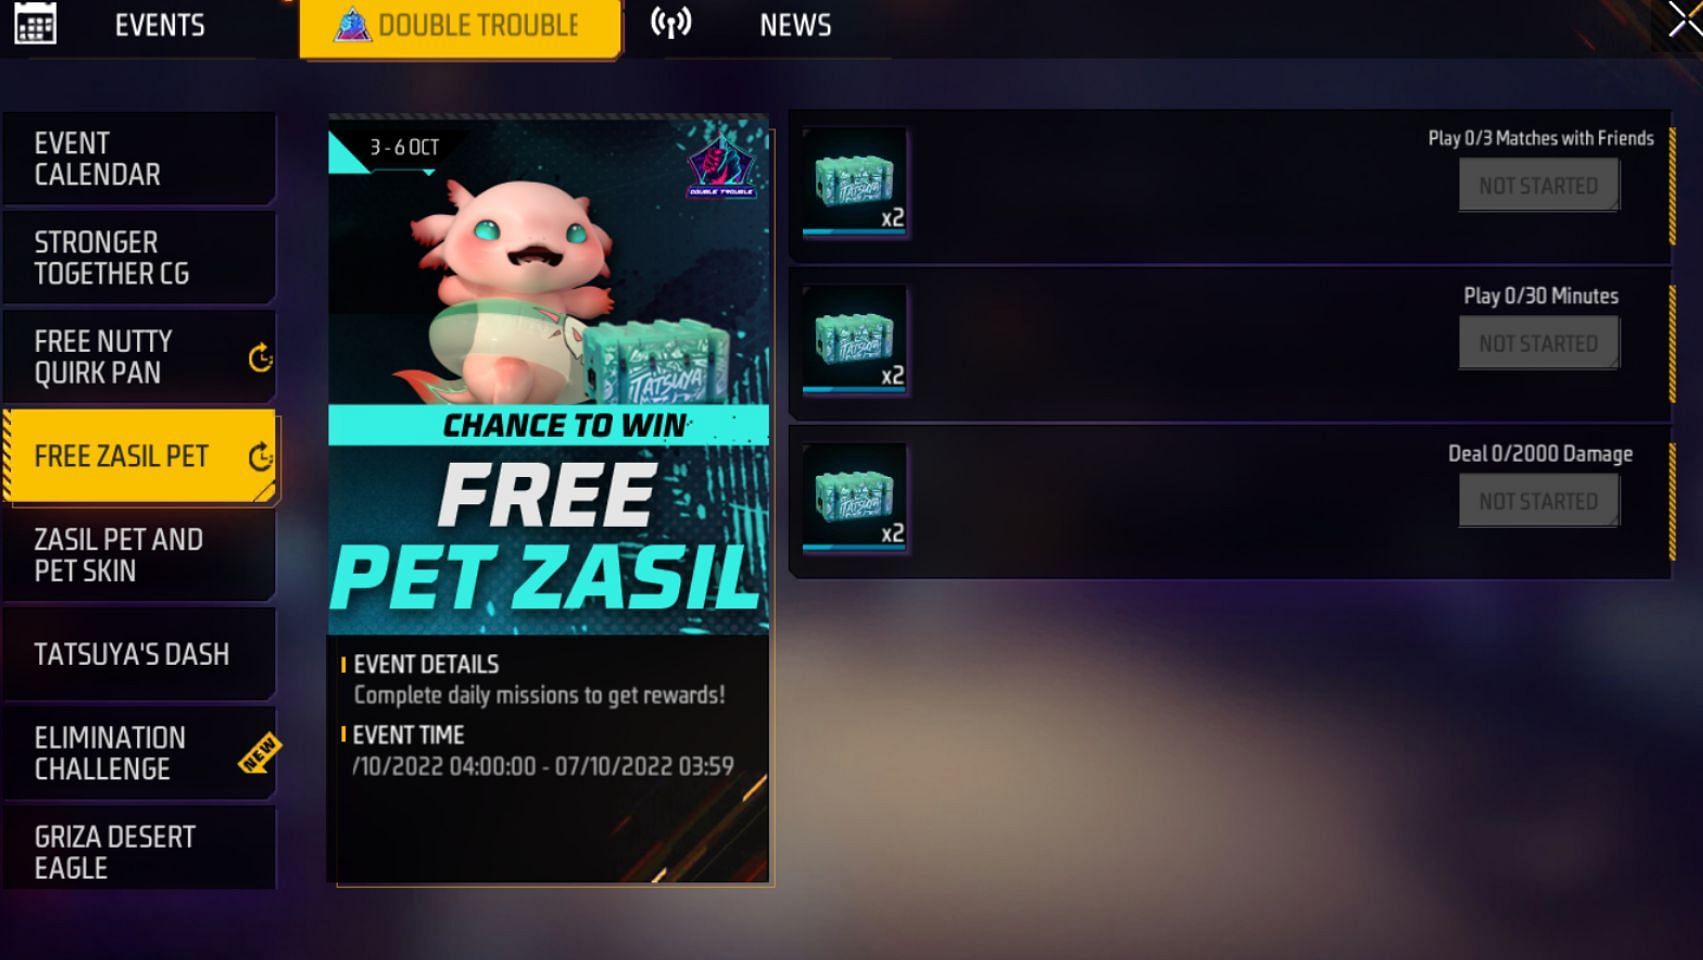 Zasil is a part of the prize pool of Double Trouble Green Crates (Image via Garena)